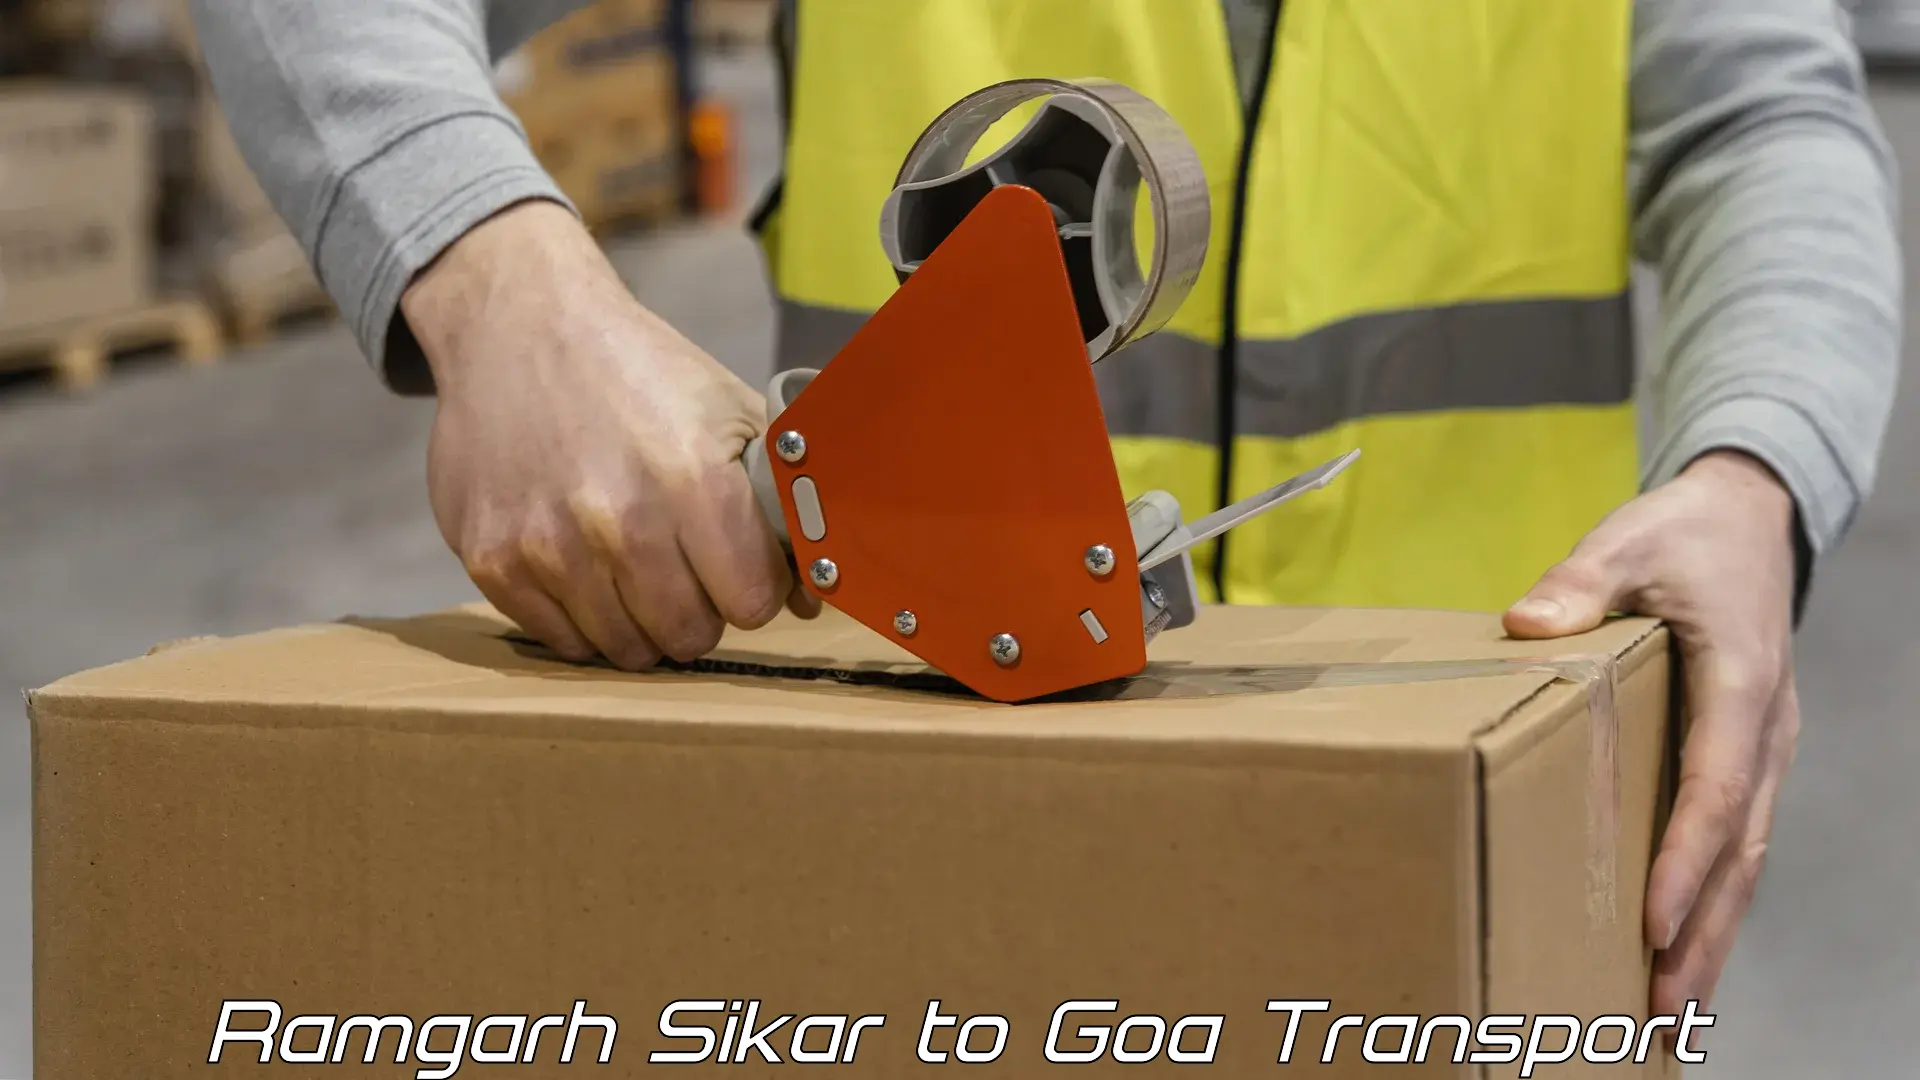 Truck transport companies in India Ramgarh Sikar to South Goa